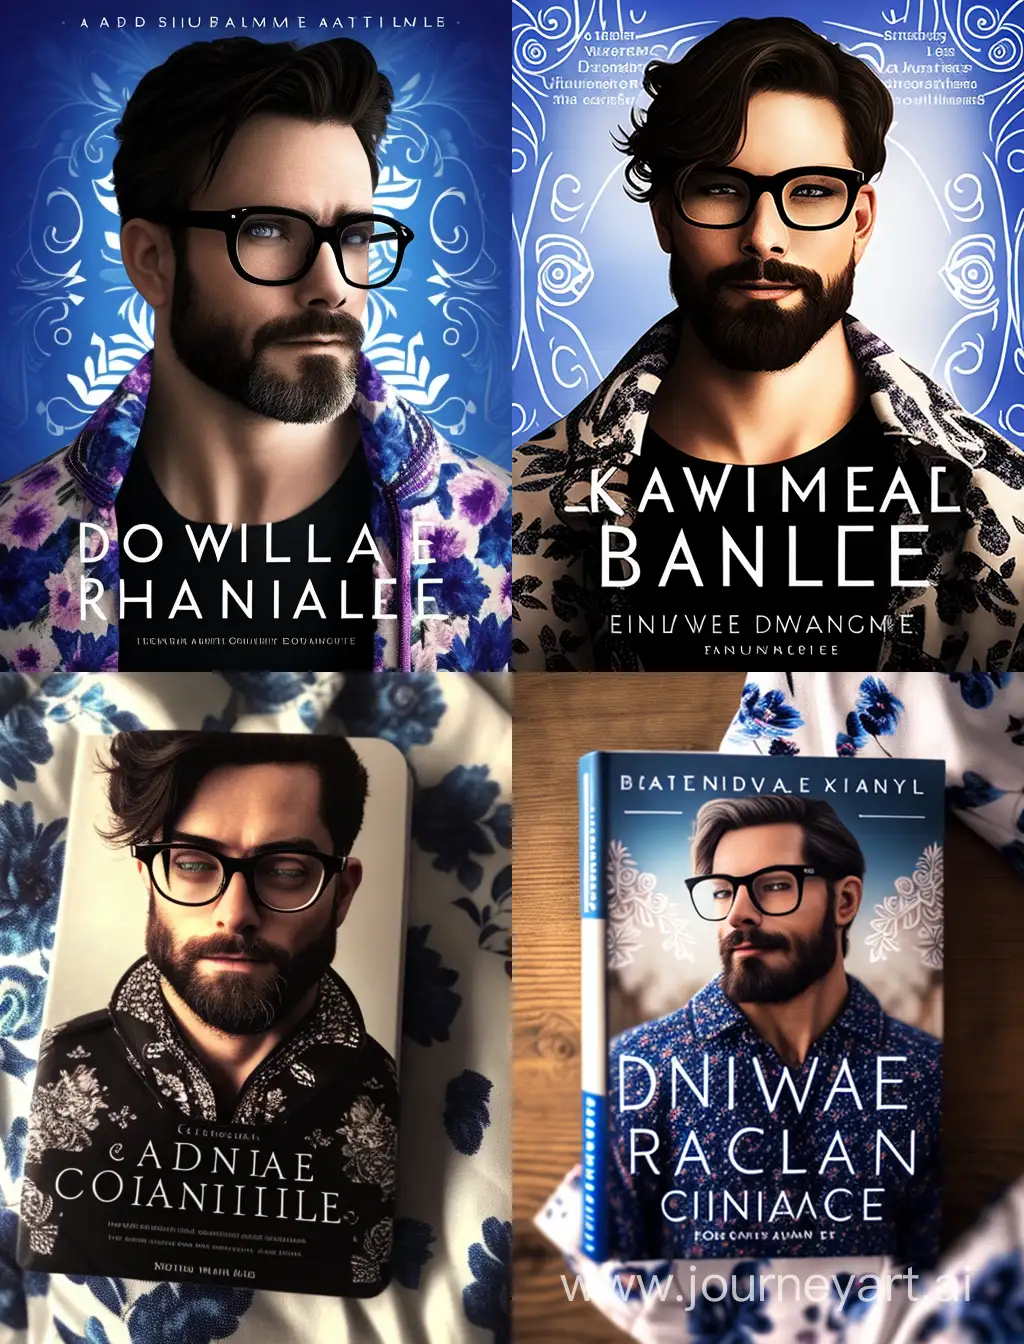 A romance novel book cover 
Male description: Wears glasses, has some beard, blue hoodie
Female description: Wearing Black and white patterned top with a round neckline